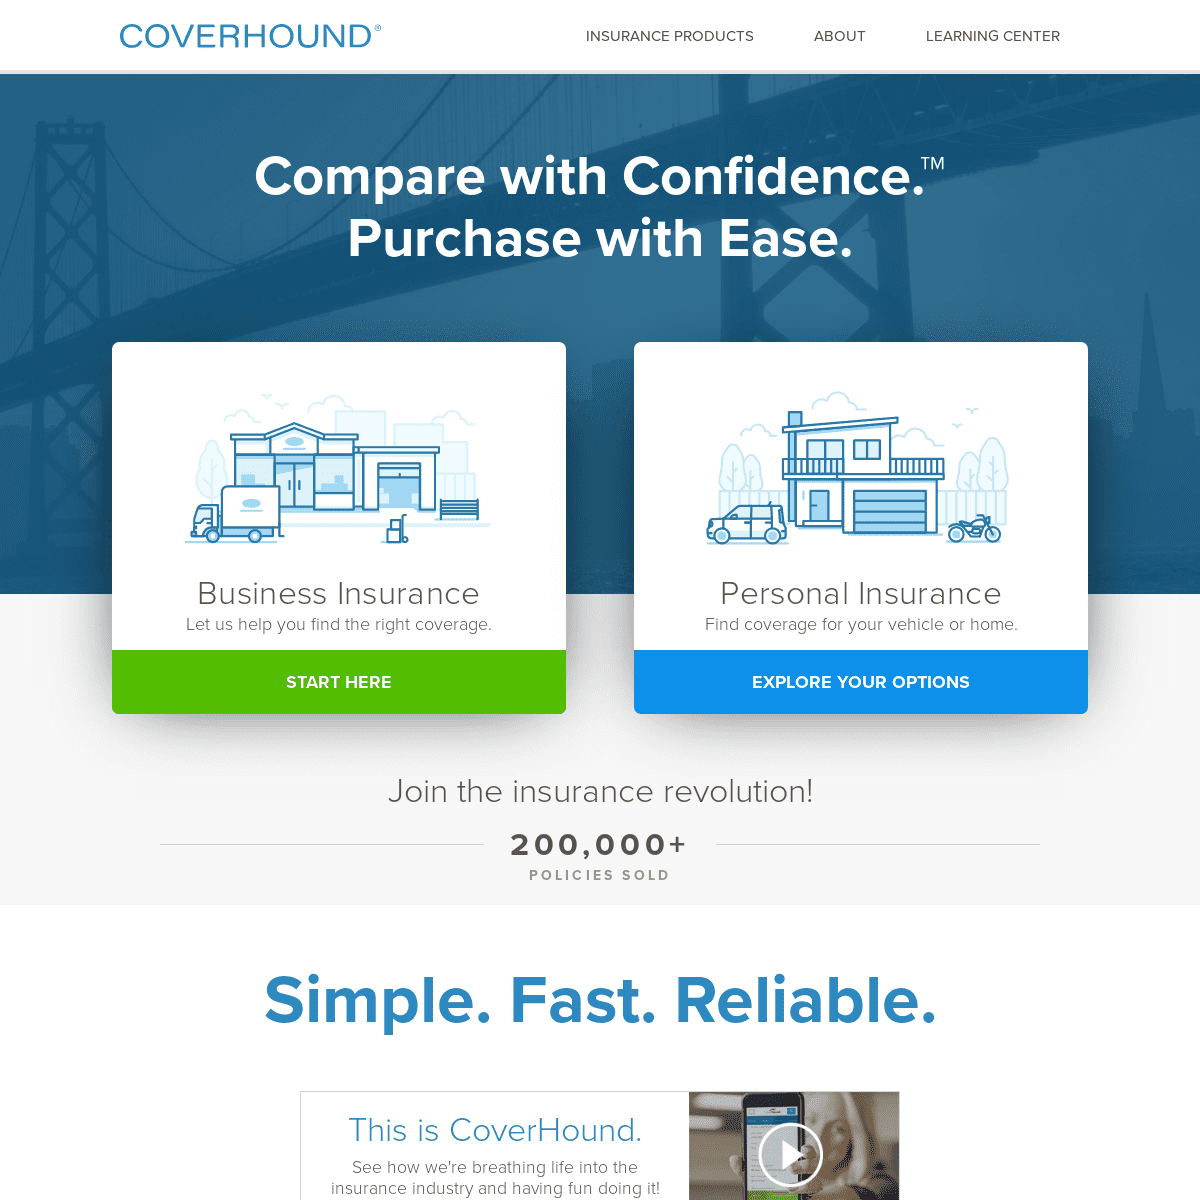 A complete backup of coverhound.com